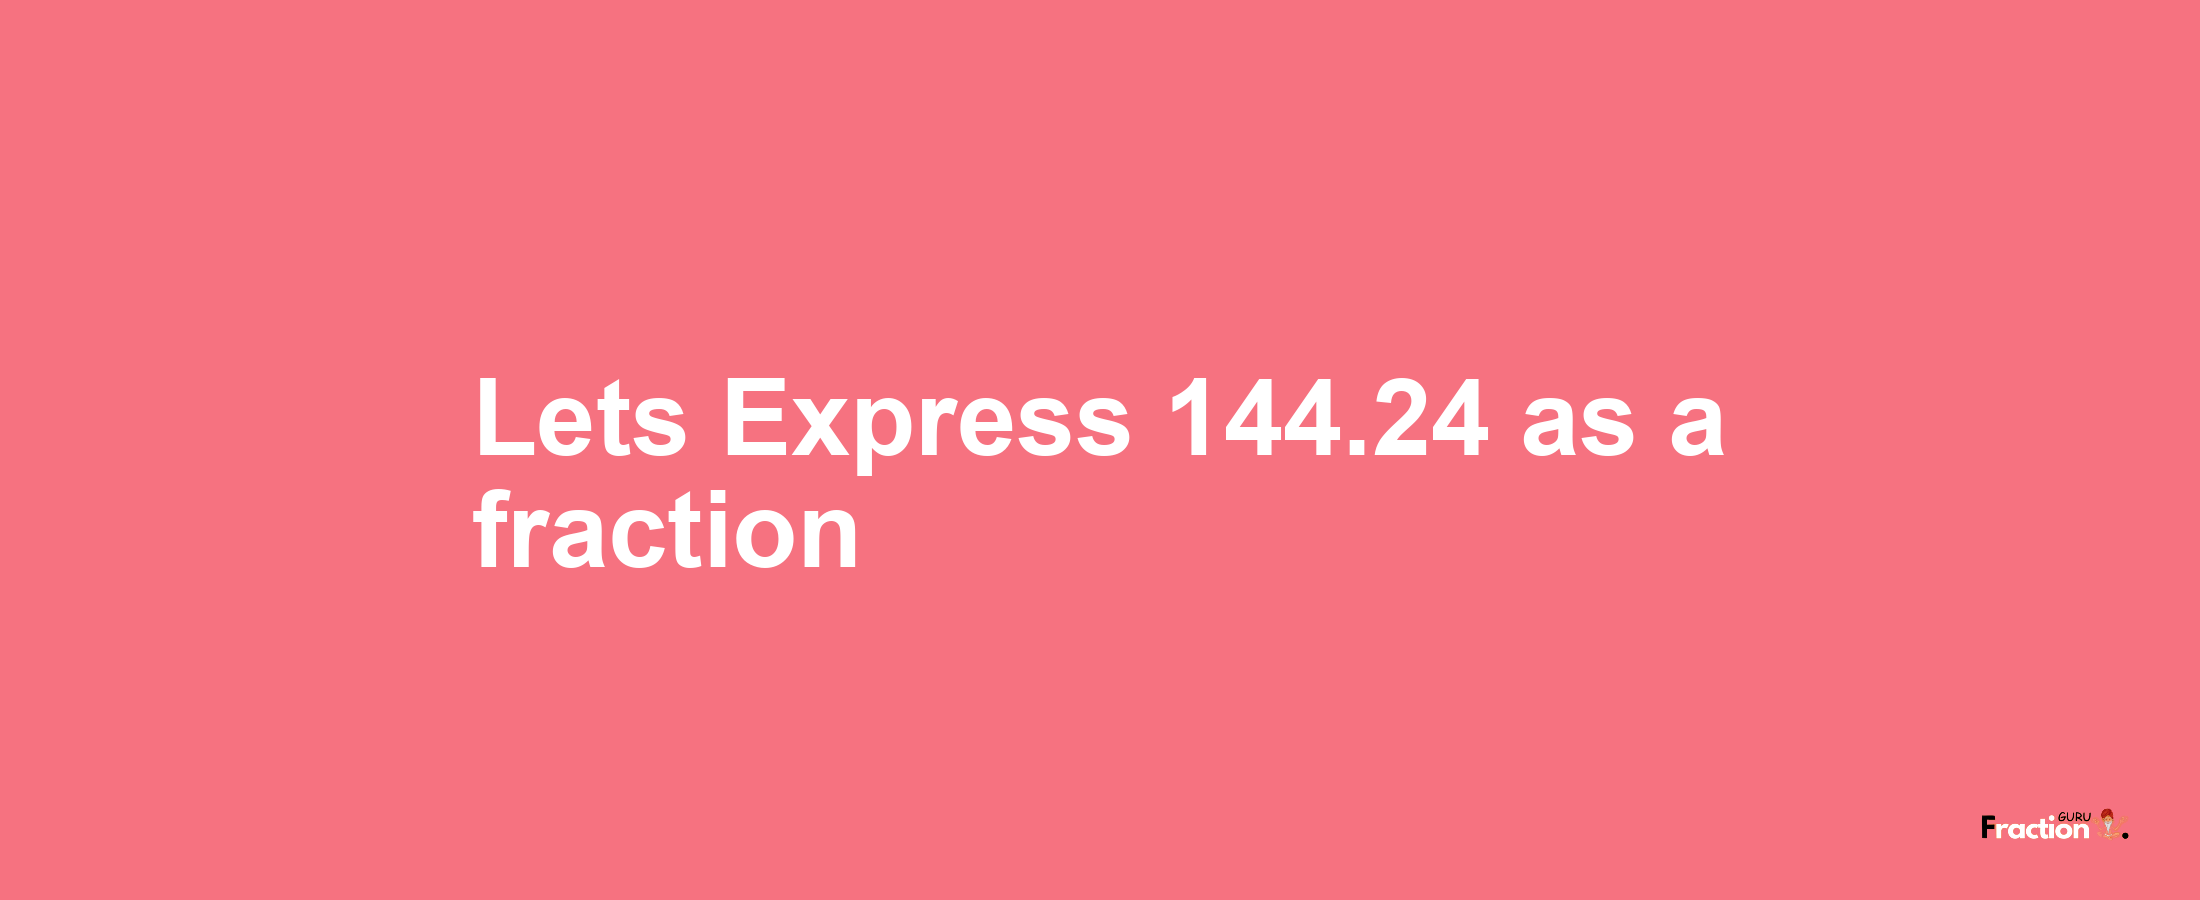 Lets Express 144.24 as afraction